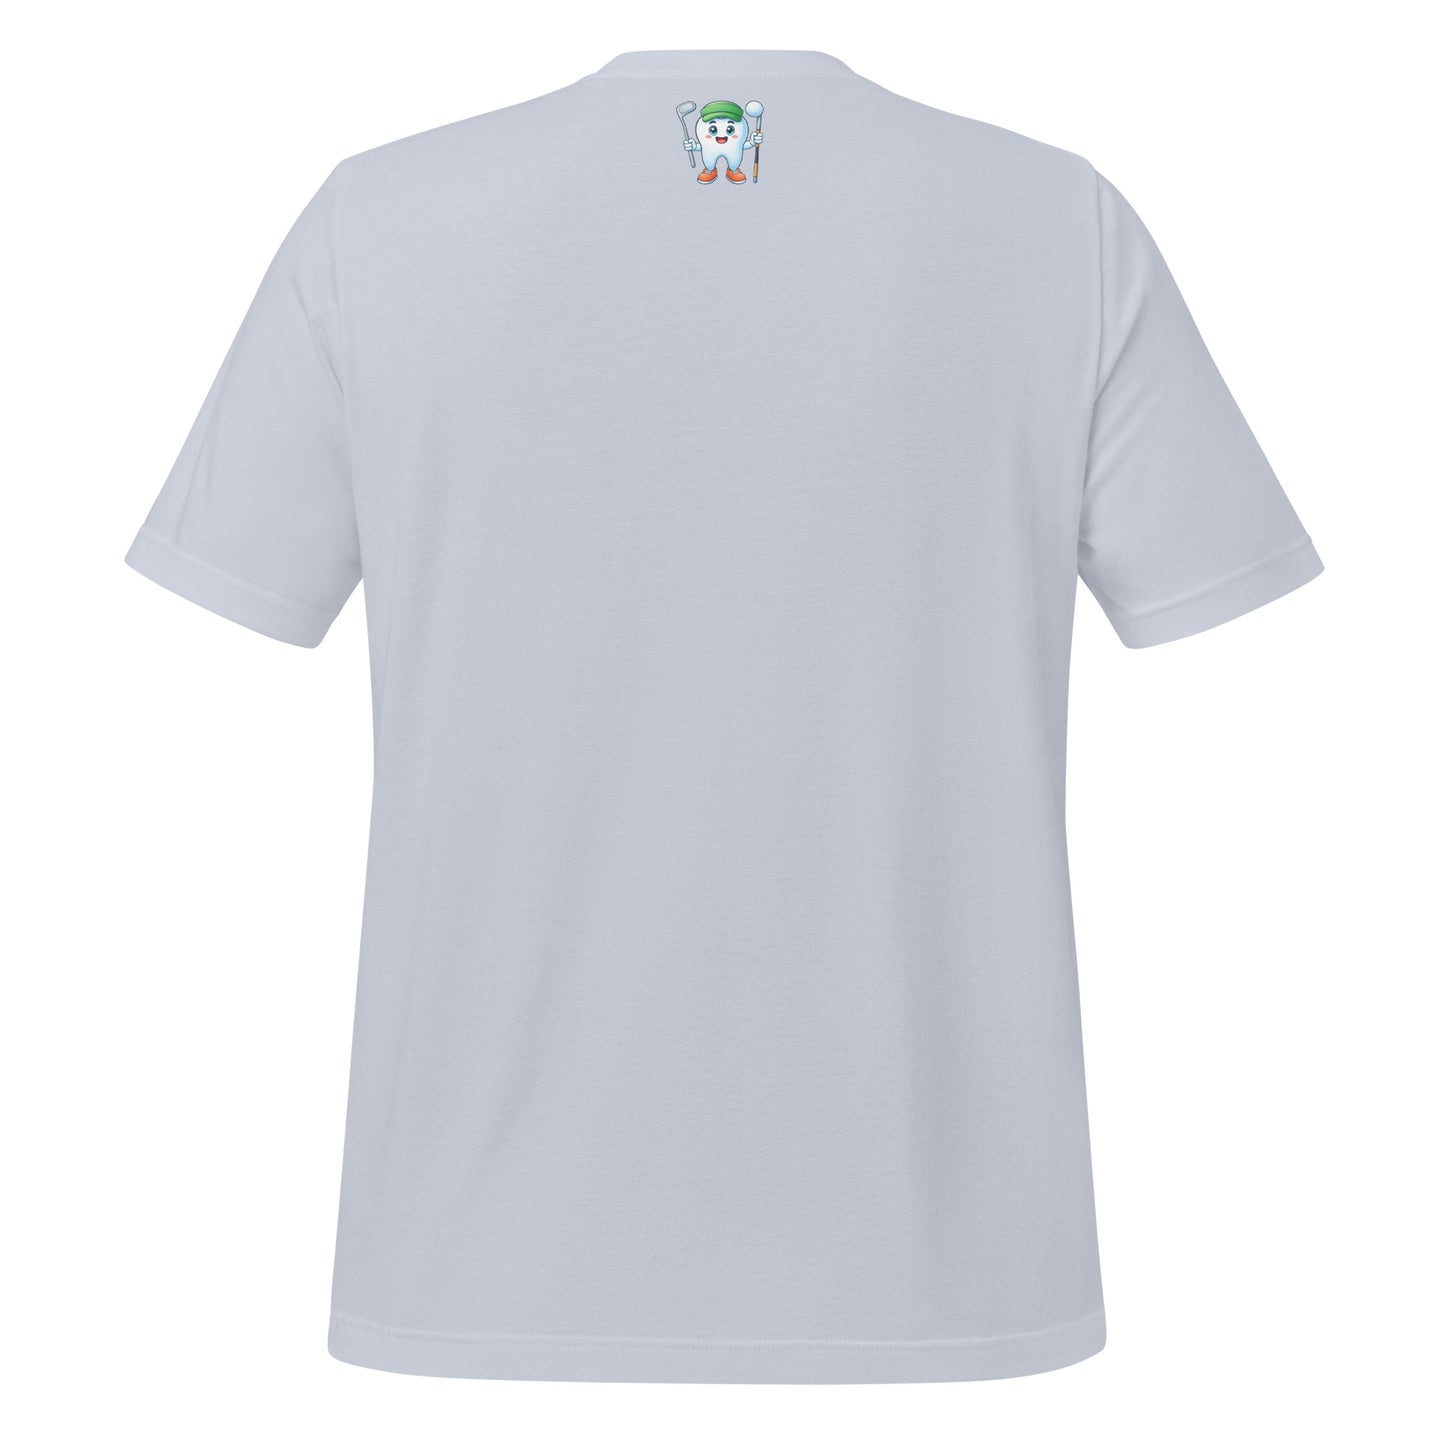 Cute dentist t-shirt showcasing an adorable tooth character in golf attire, joyfully celebrating a ‘hole in one’ achievement, perfect for dentist and dental professionals seeking unique and thematic dental apparel. Light blue color, back view.